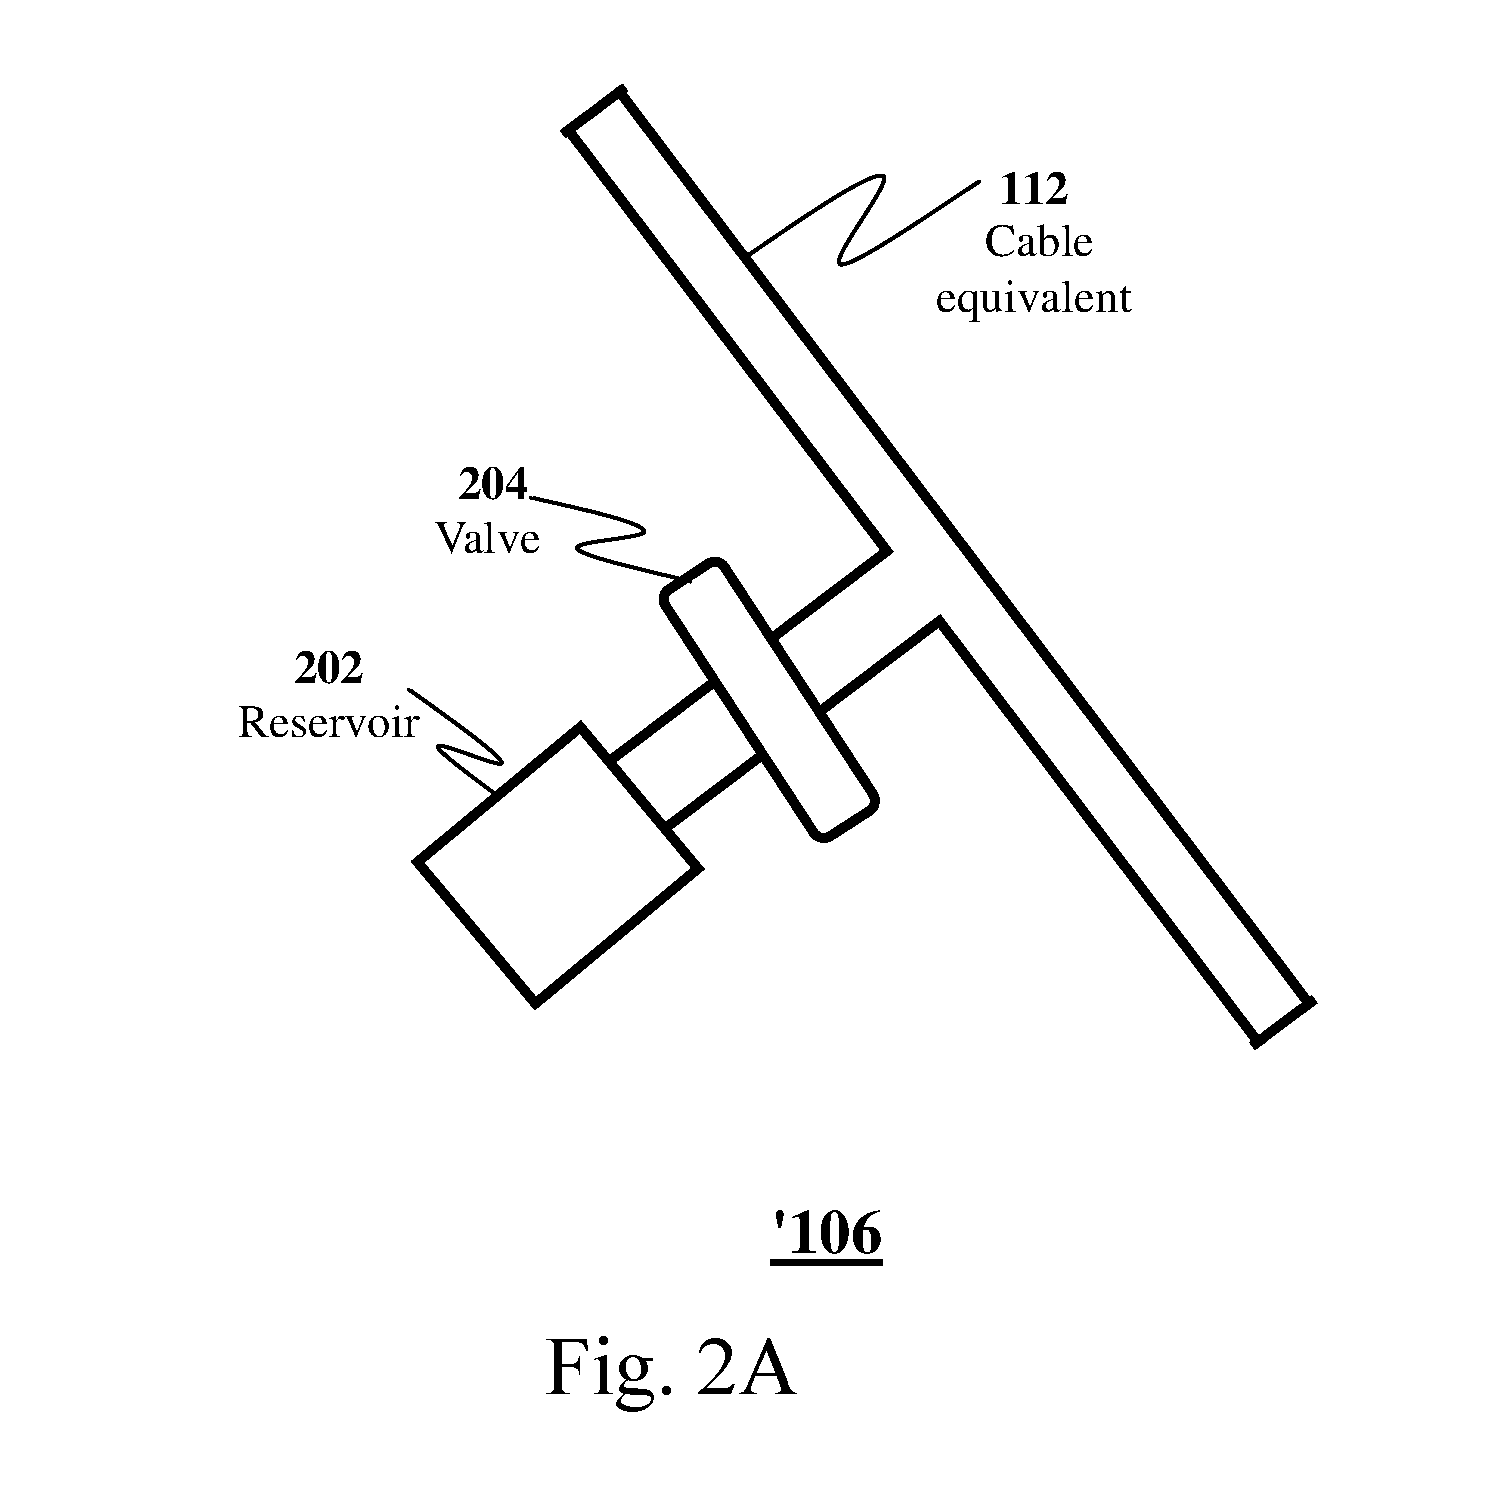 Apparatus and methods for corrective guidance of eating behavior after weight loss surgery